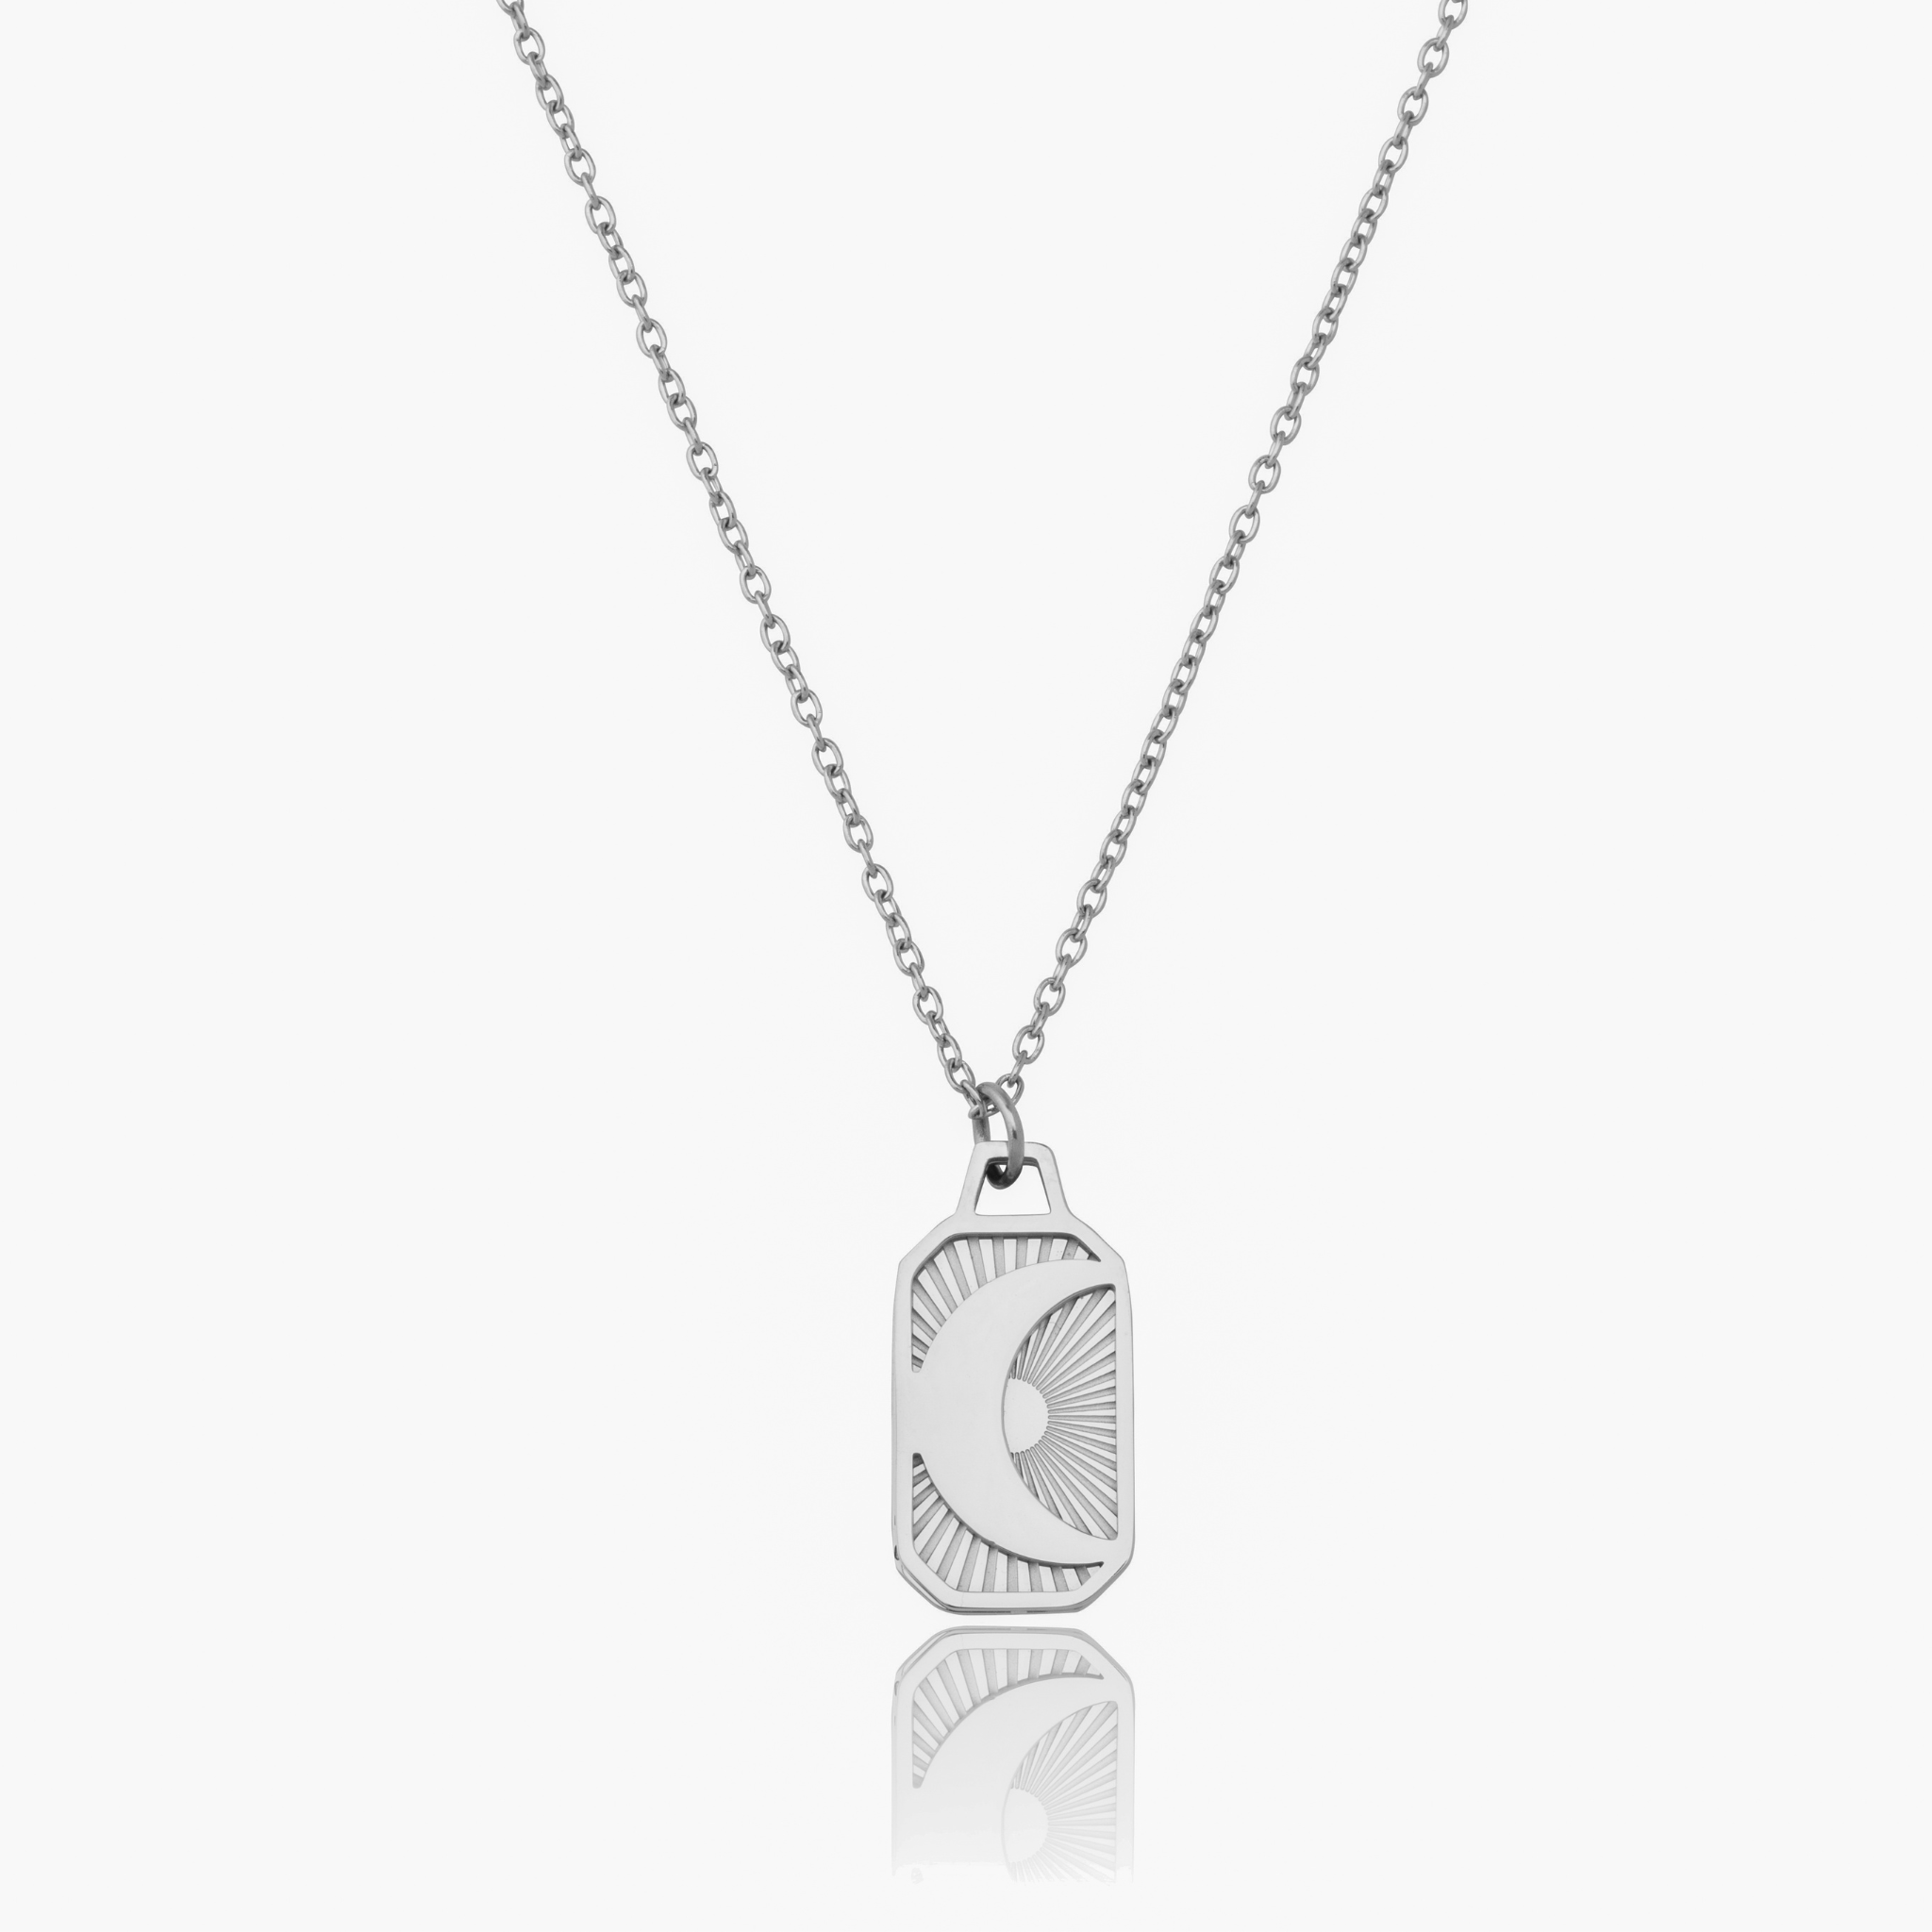 Stainless Steel Crescent Moon Pendant and Chain